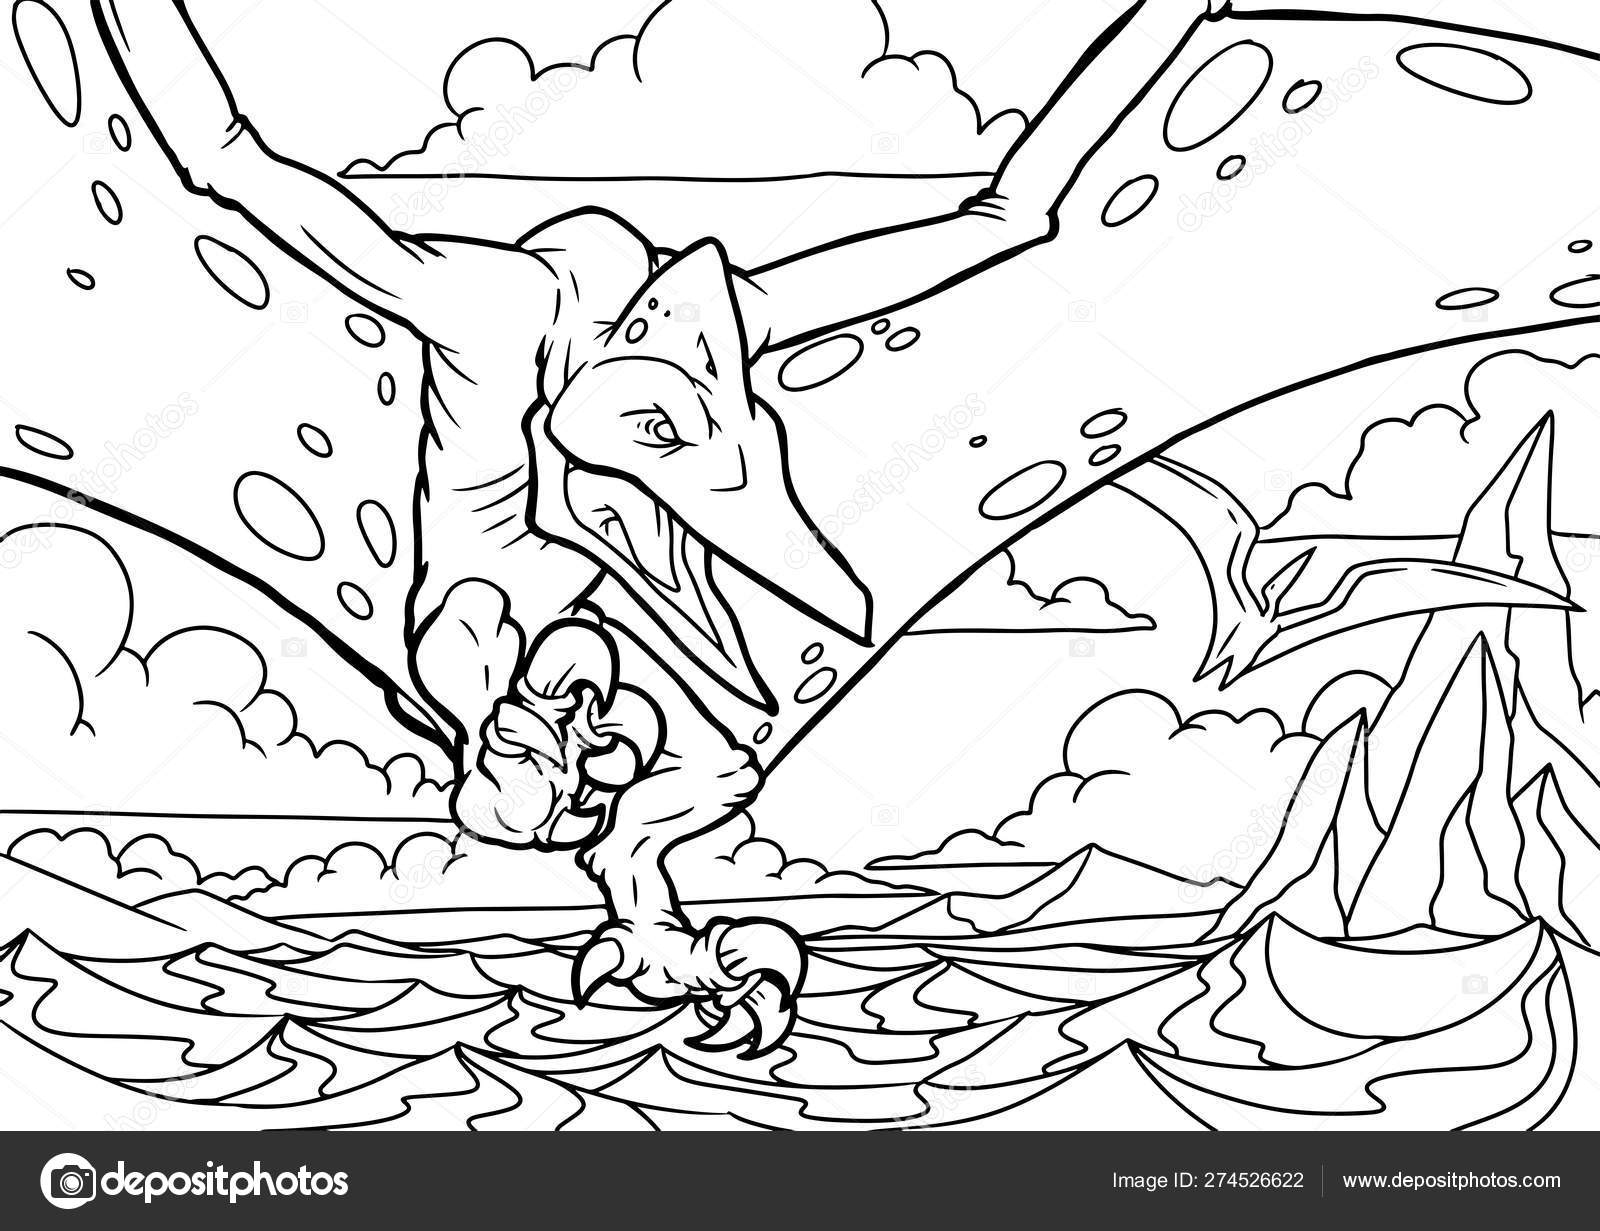 Outline dinosaur pterodactyl illustration suitable for any of graphic design project such as coloring book and education stock vector by blackrhino